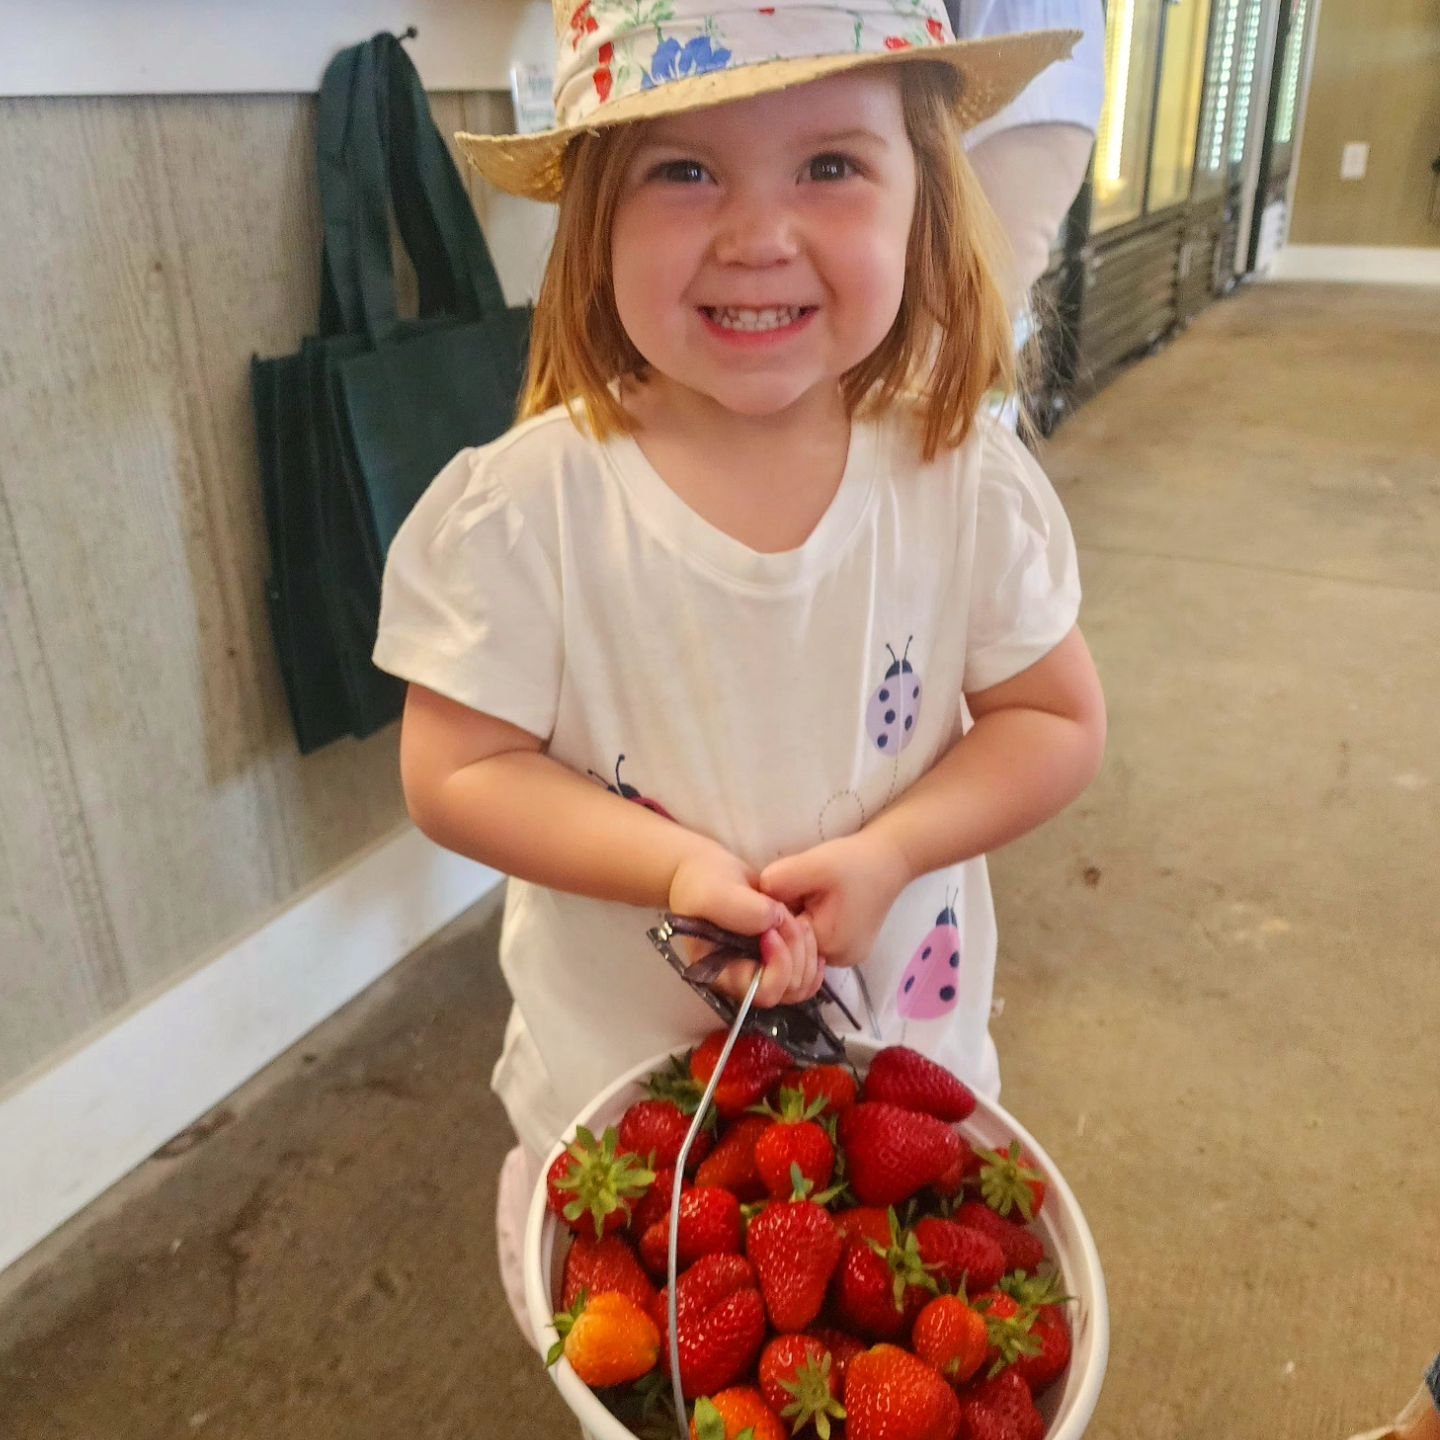 Helen says, &quot;It's a beautiful week to enjoy the strawberry patches and sunshine at Garner's!&quot; Come out and pick all the strawberries you want! This weather has made the berries super sweet, wonderfully juicy, and plentiful! The fields are l